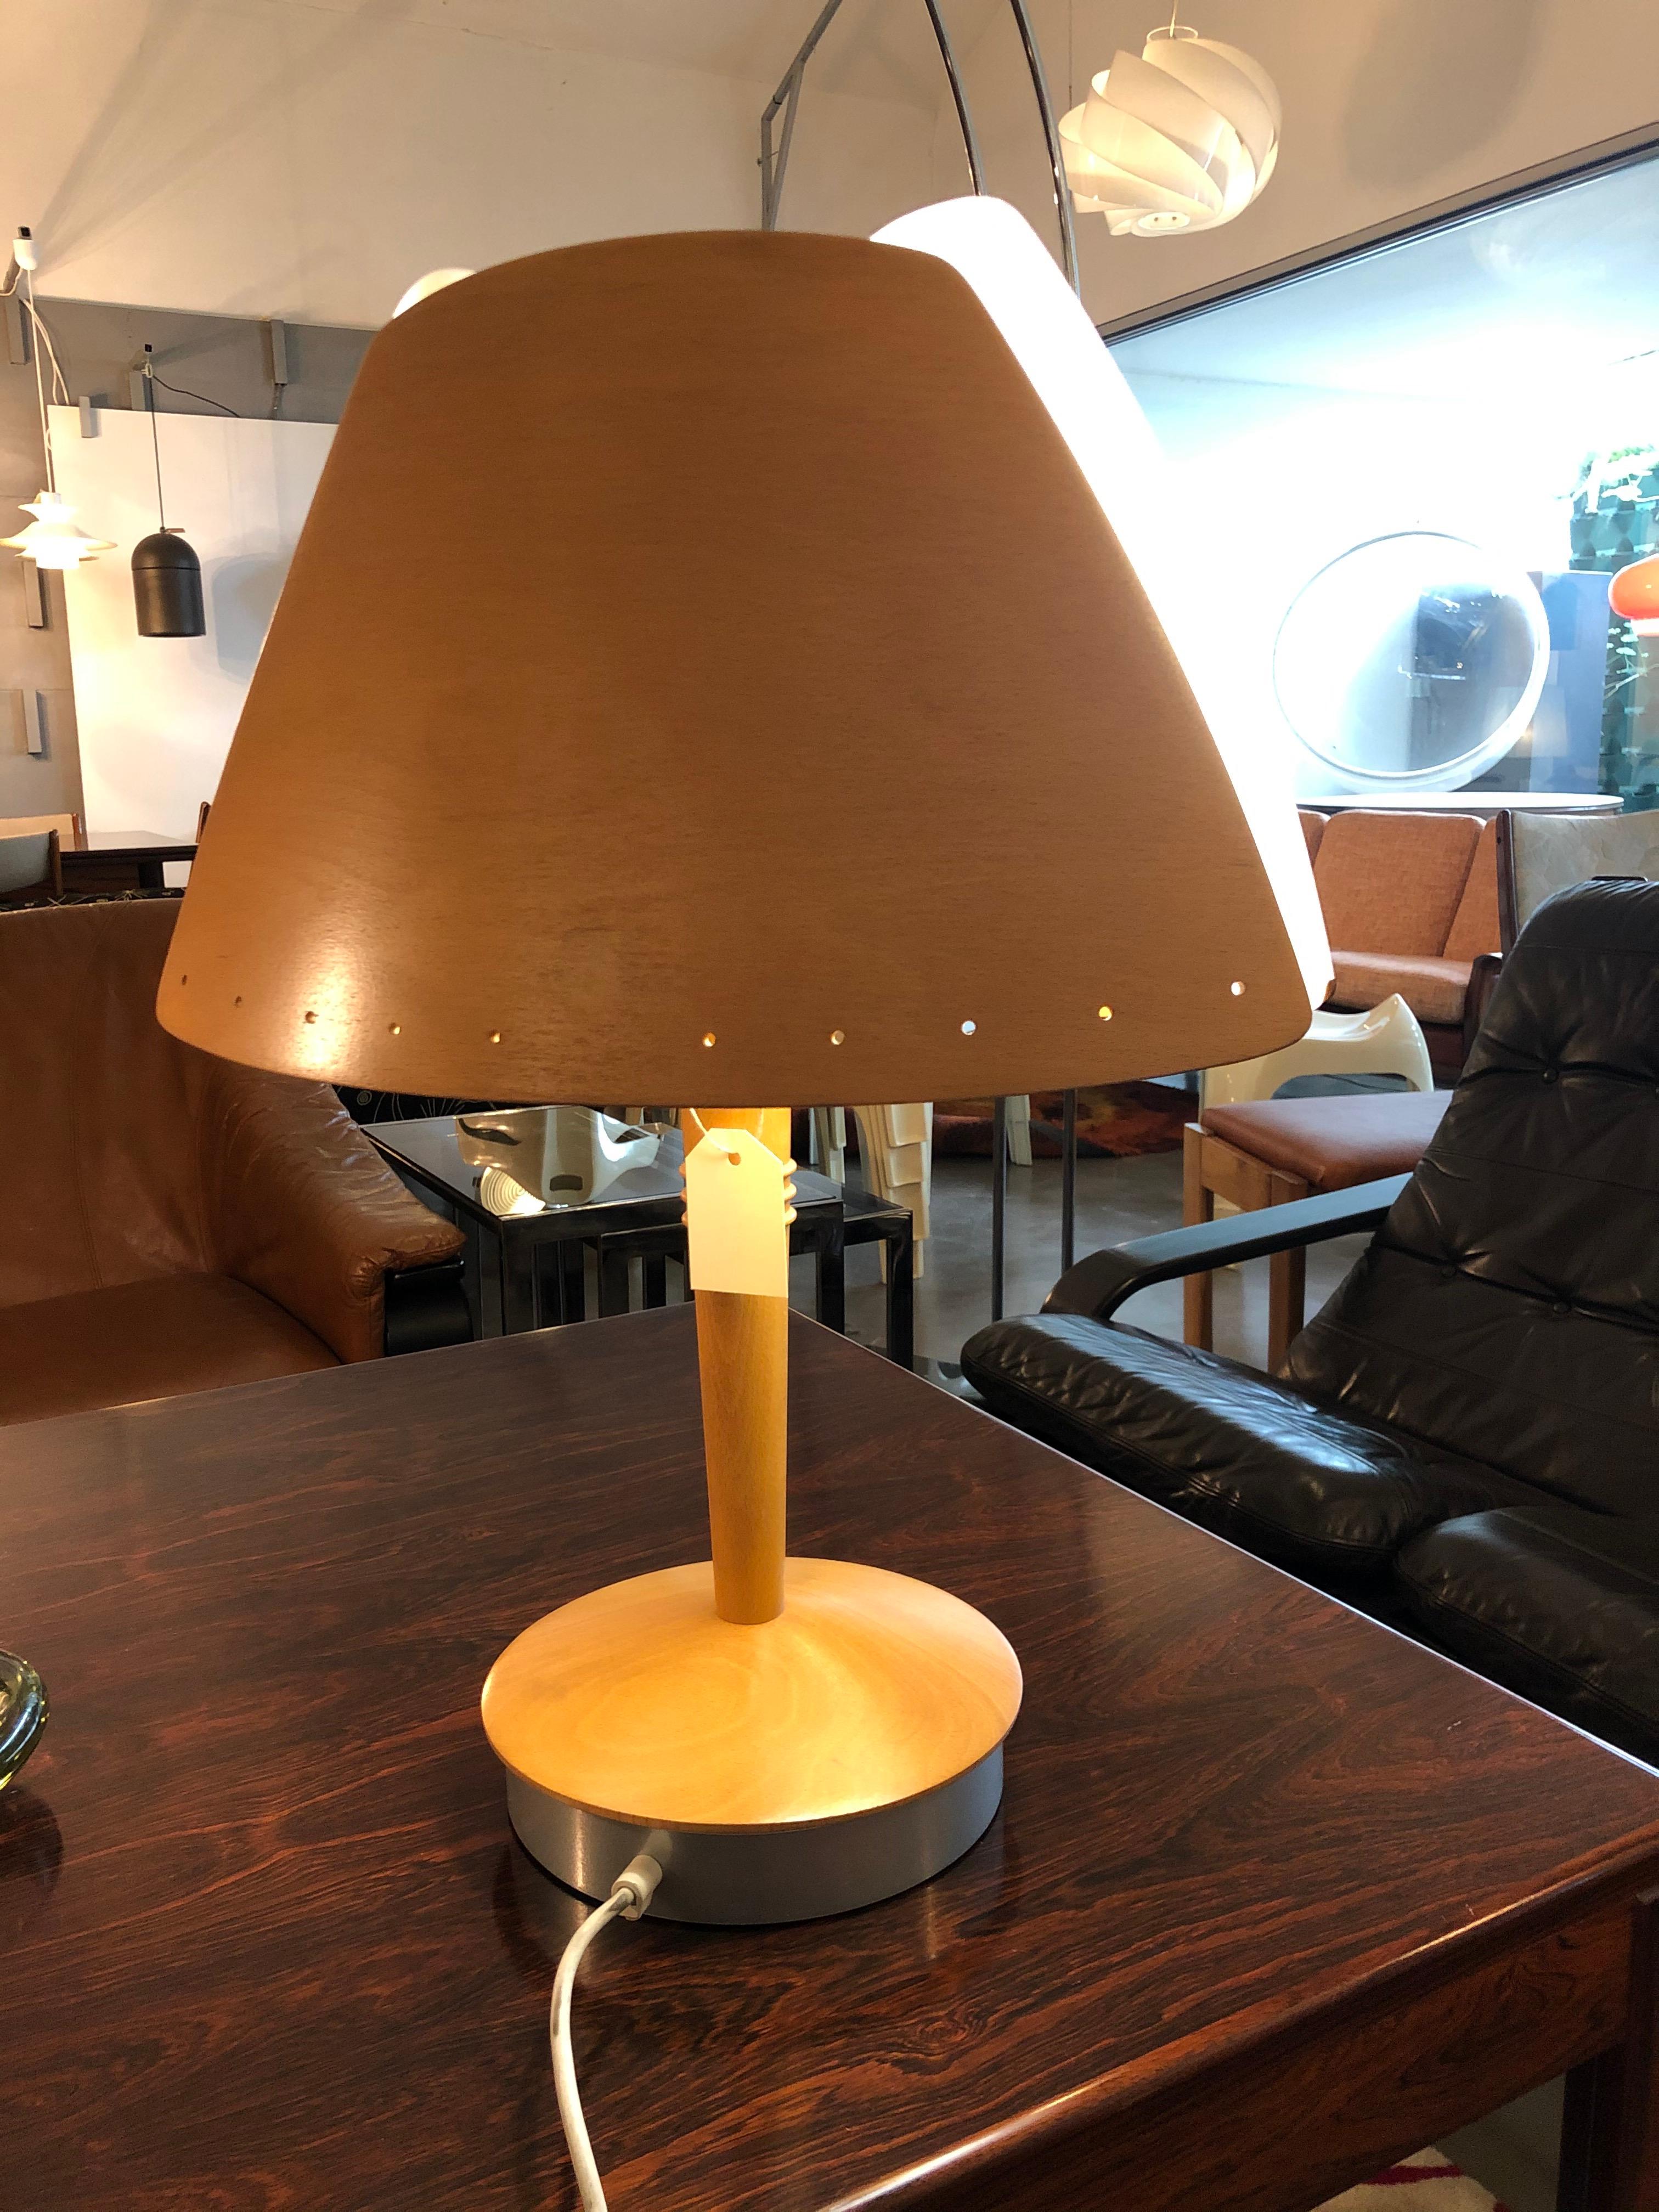 This Scandinavian style table lamp was designed and made by Lucid in France for the Barcelona Hilton Hotel during the 1970s.

It`s made of a wooden base and shade with methacrylate which reflects the light from the sides, top and bottom.

In